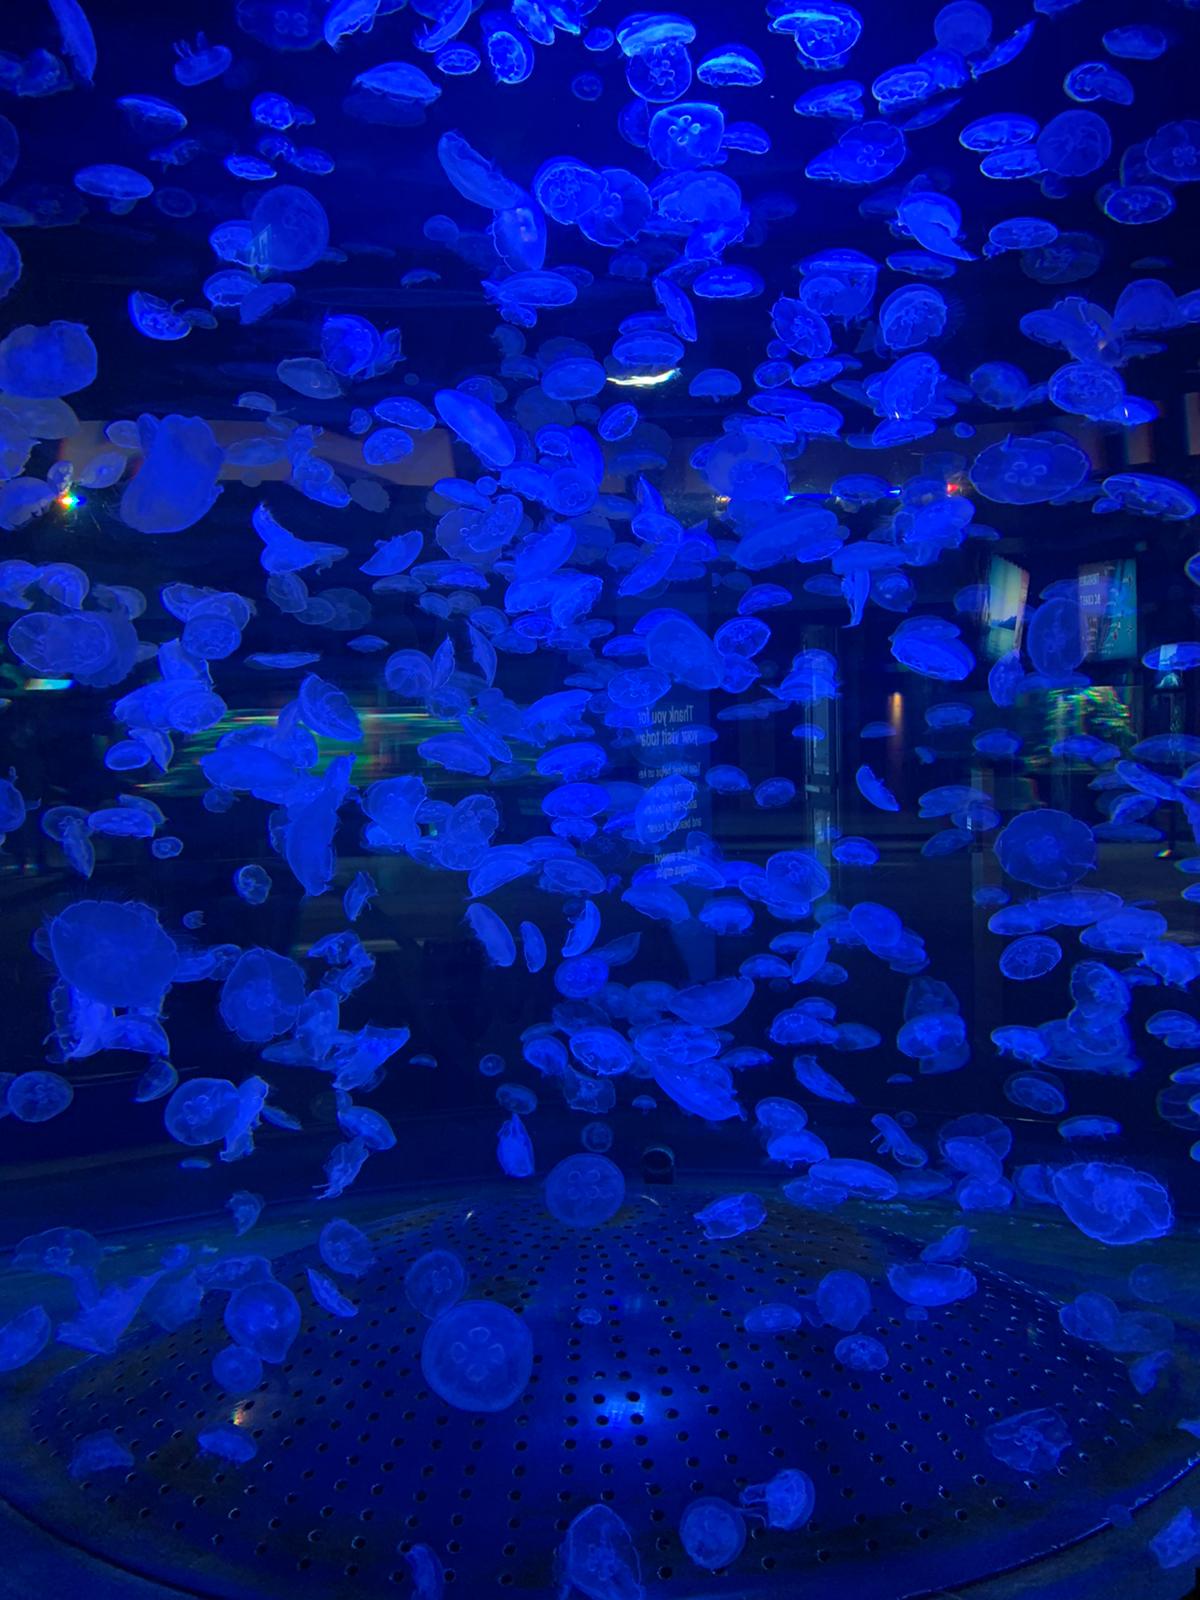 You are currently viewing 【再開後初】バンクーバー水族館に行ってみました